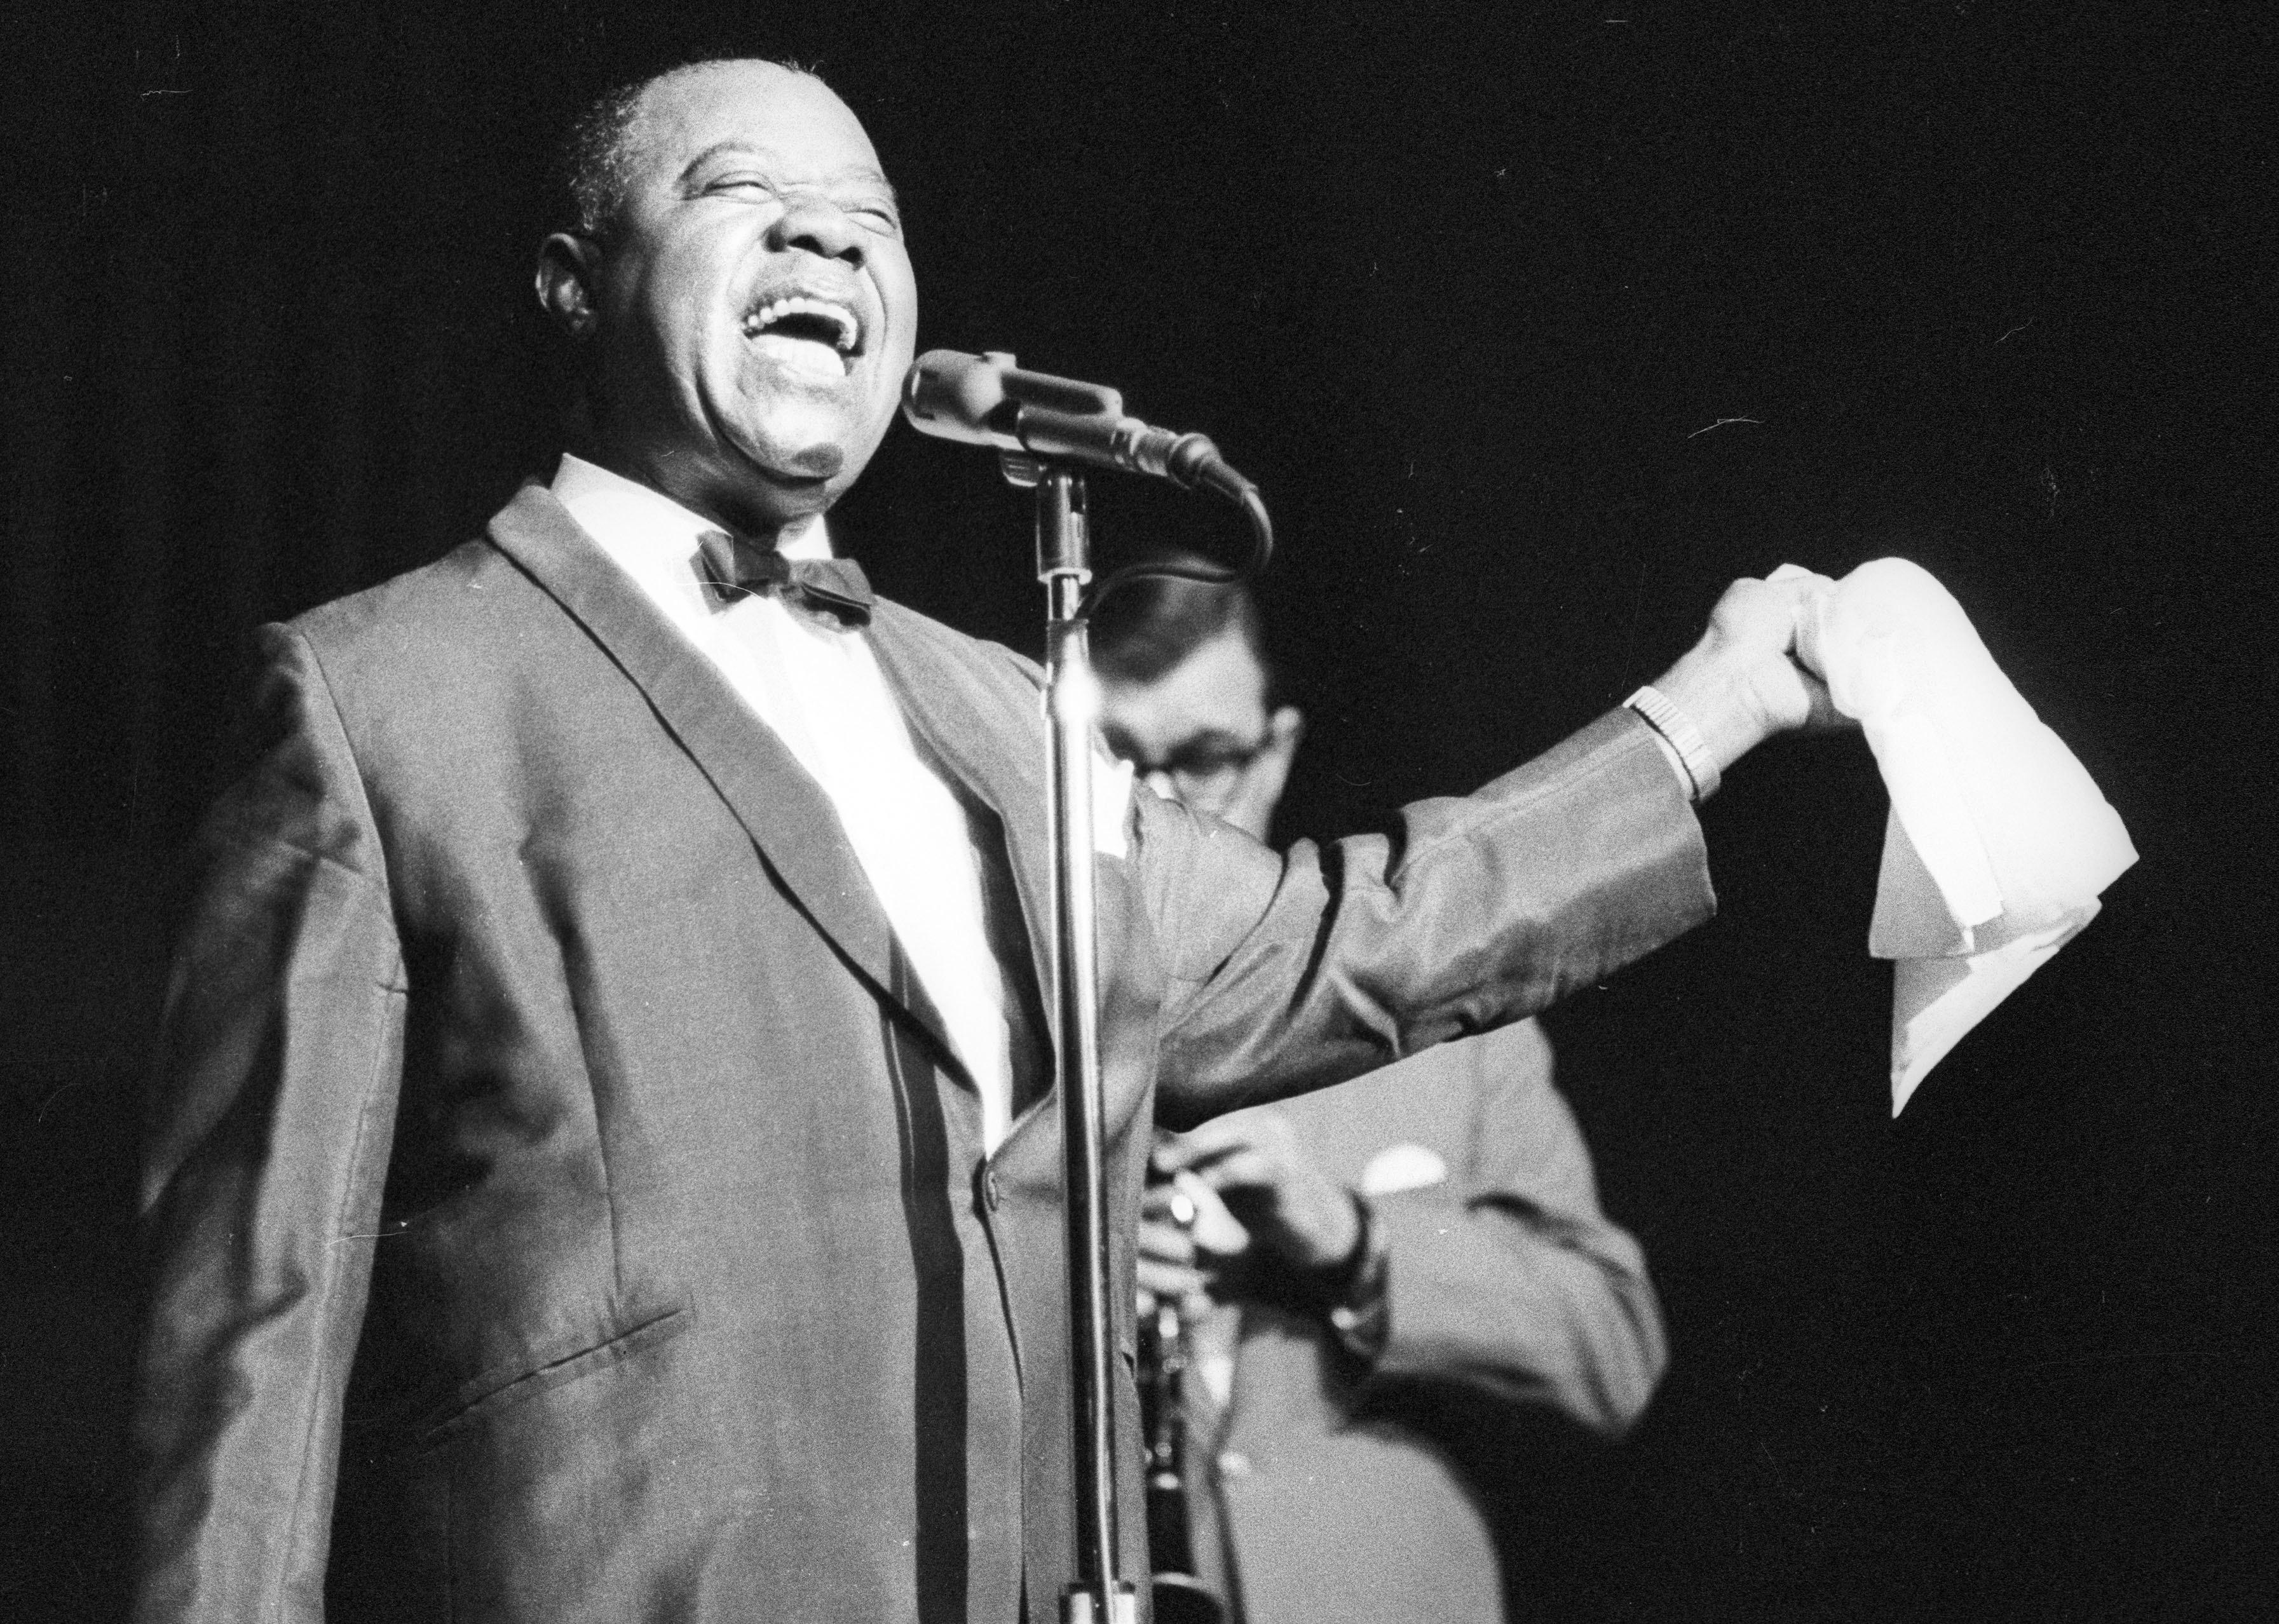 Louis Armstrong in a suit singing onstage.